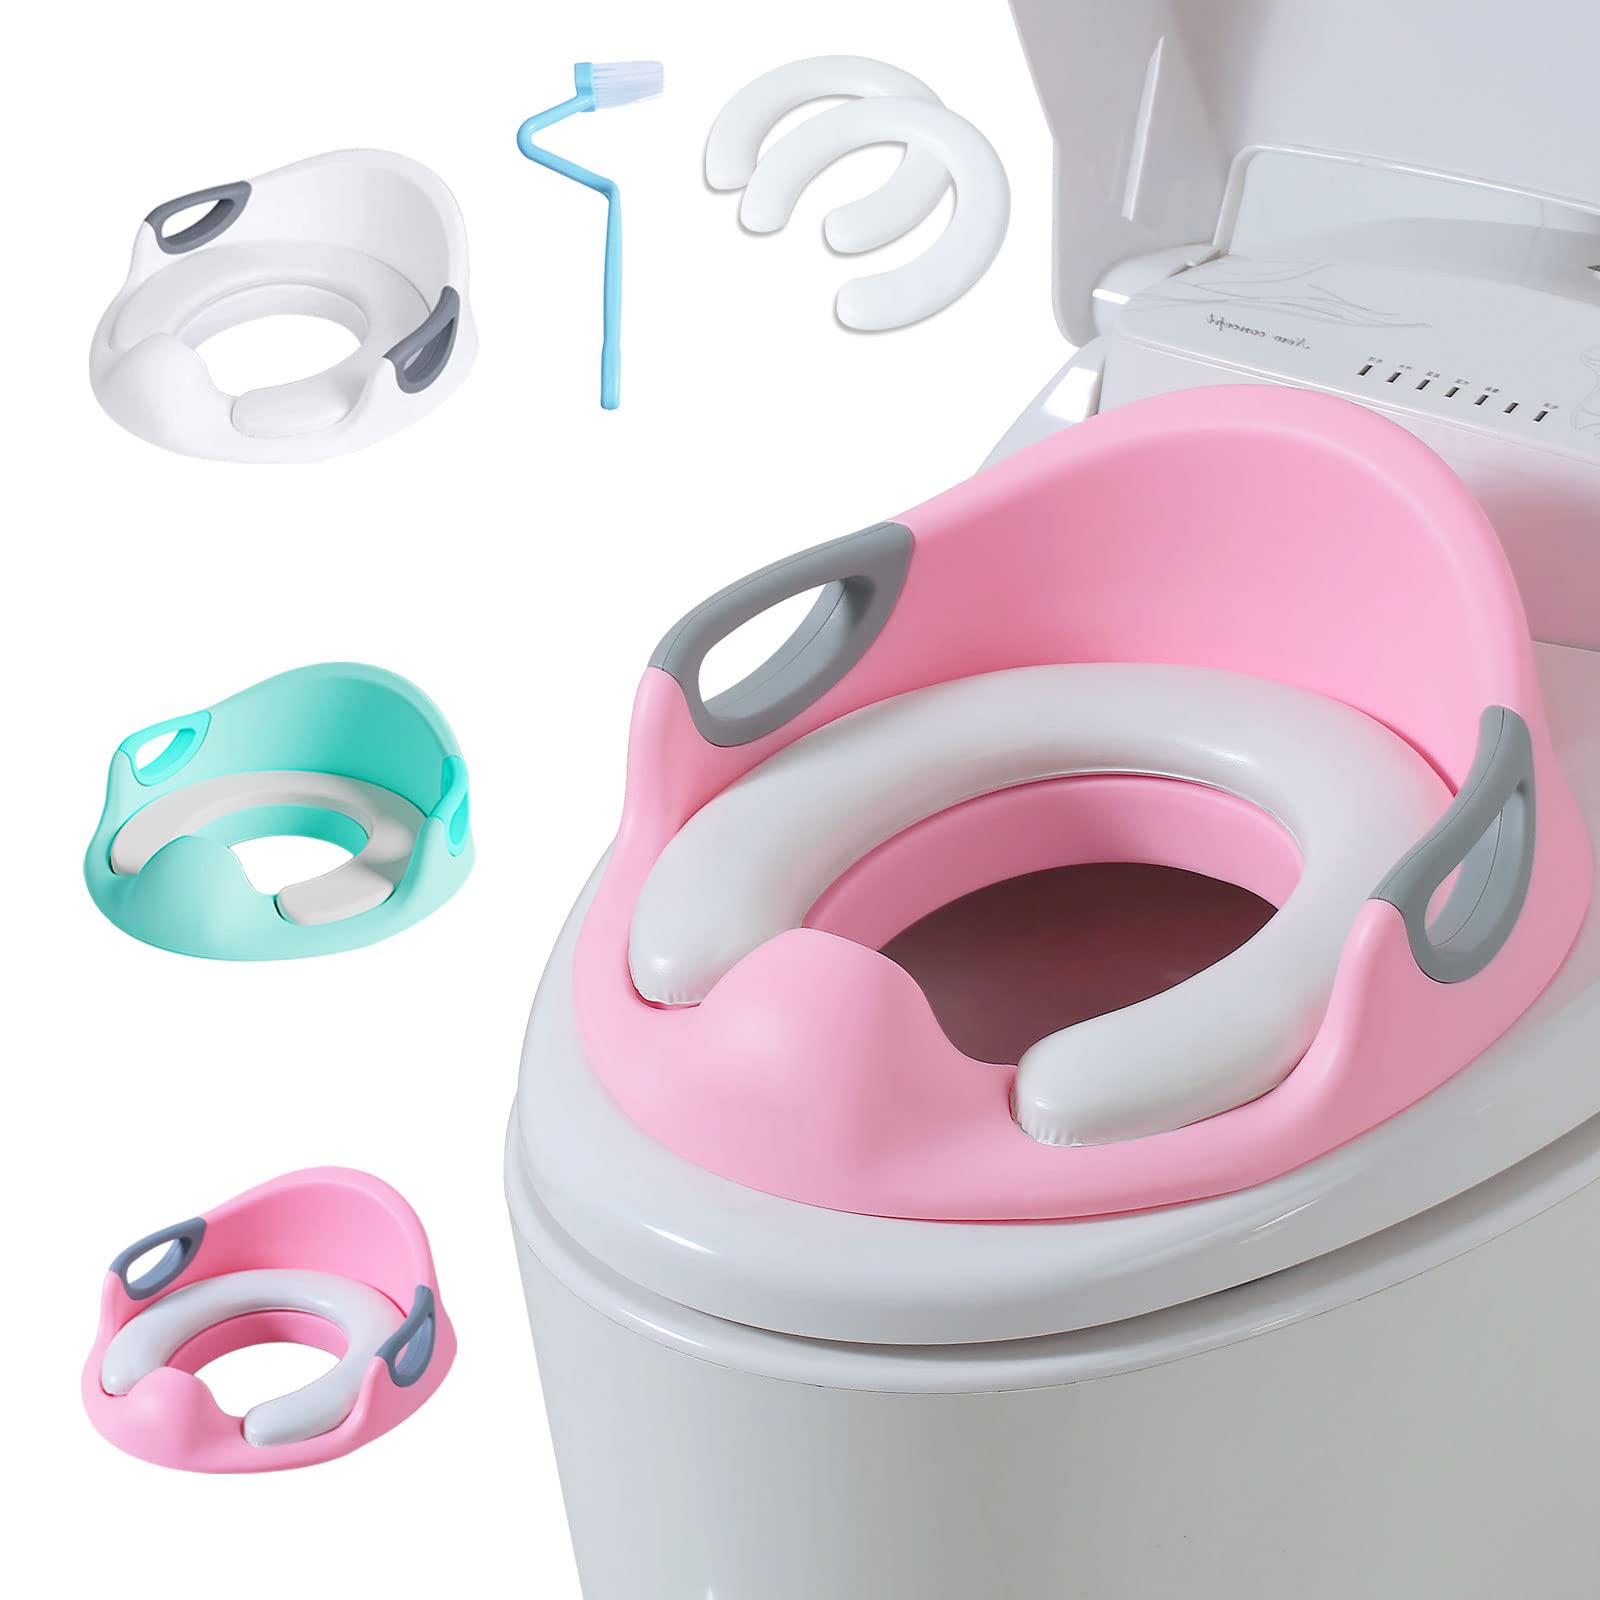 Potty Training Seat for Kids Training Seat Easy to Clean Toilet Trainer with 2pcs Cushion Safety Handles Backrest Portable for Indoor Outdoor Travel Apply to Round and Oval Toilets (Pink)